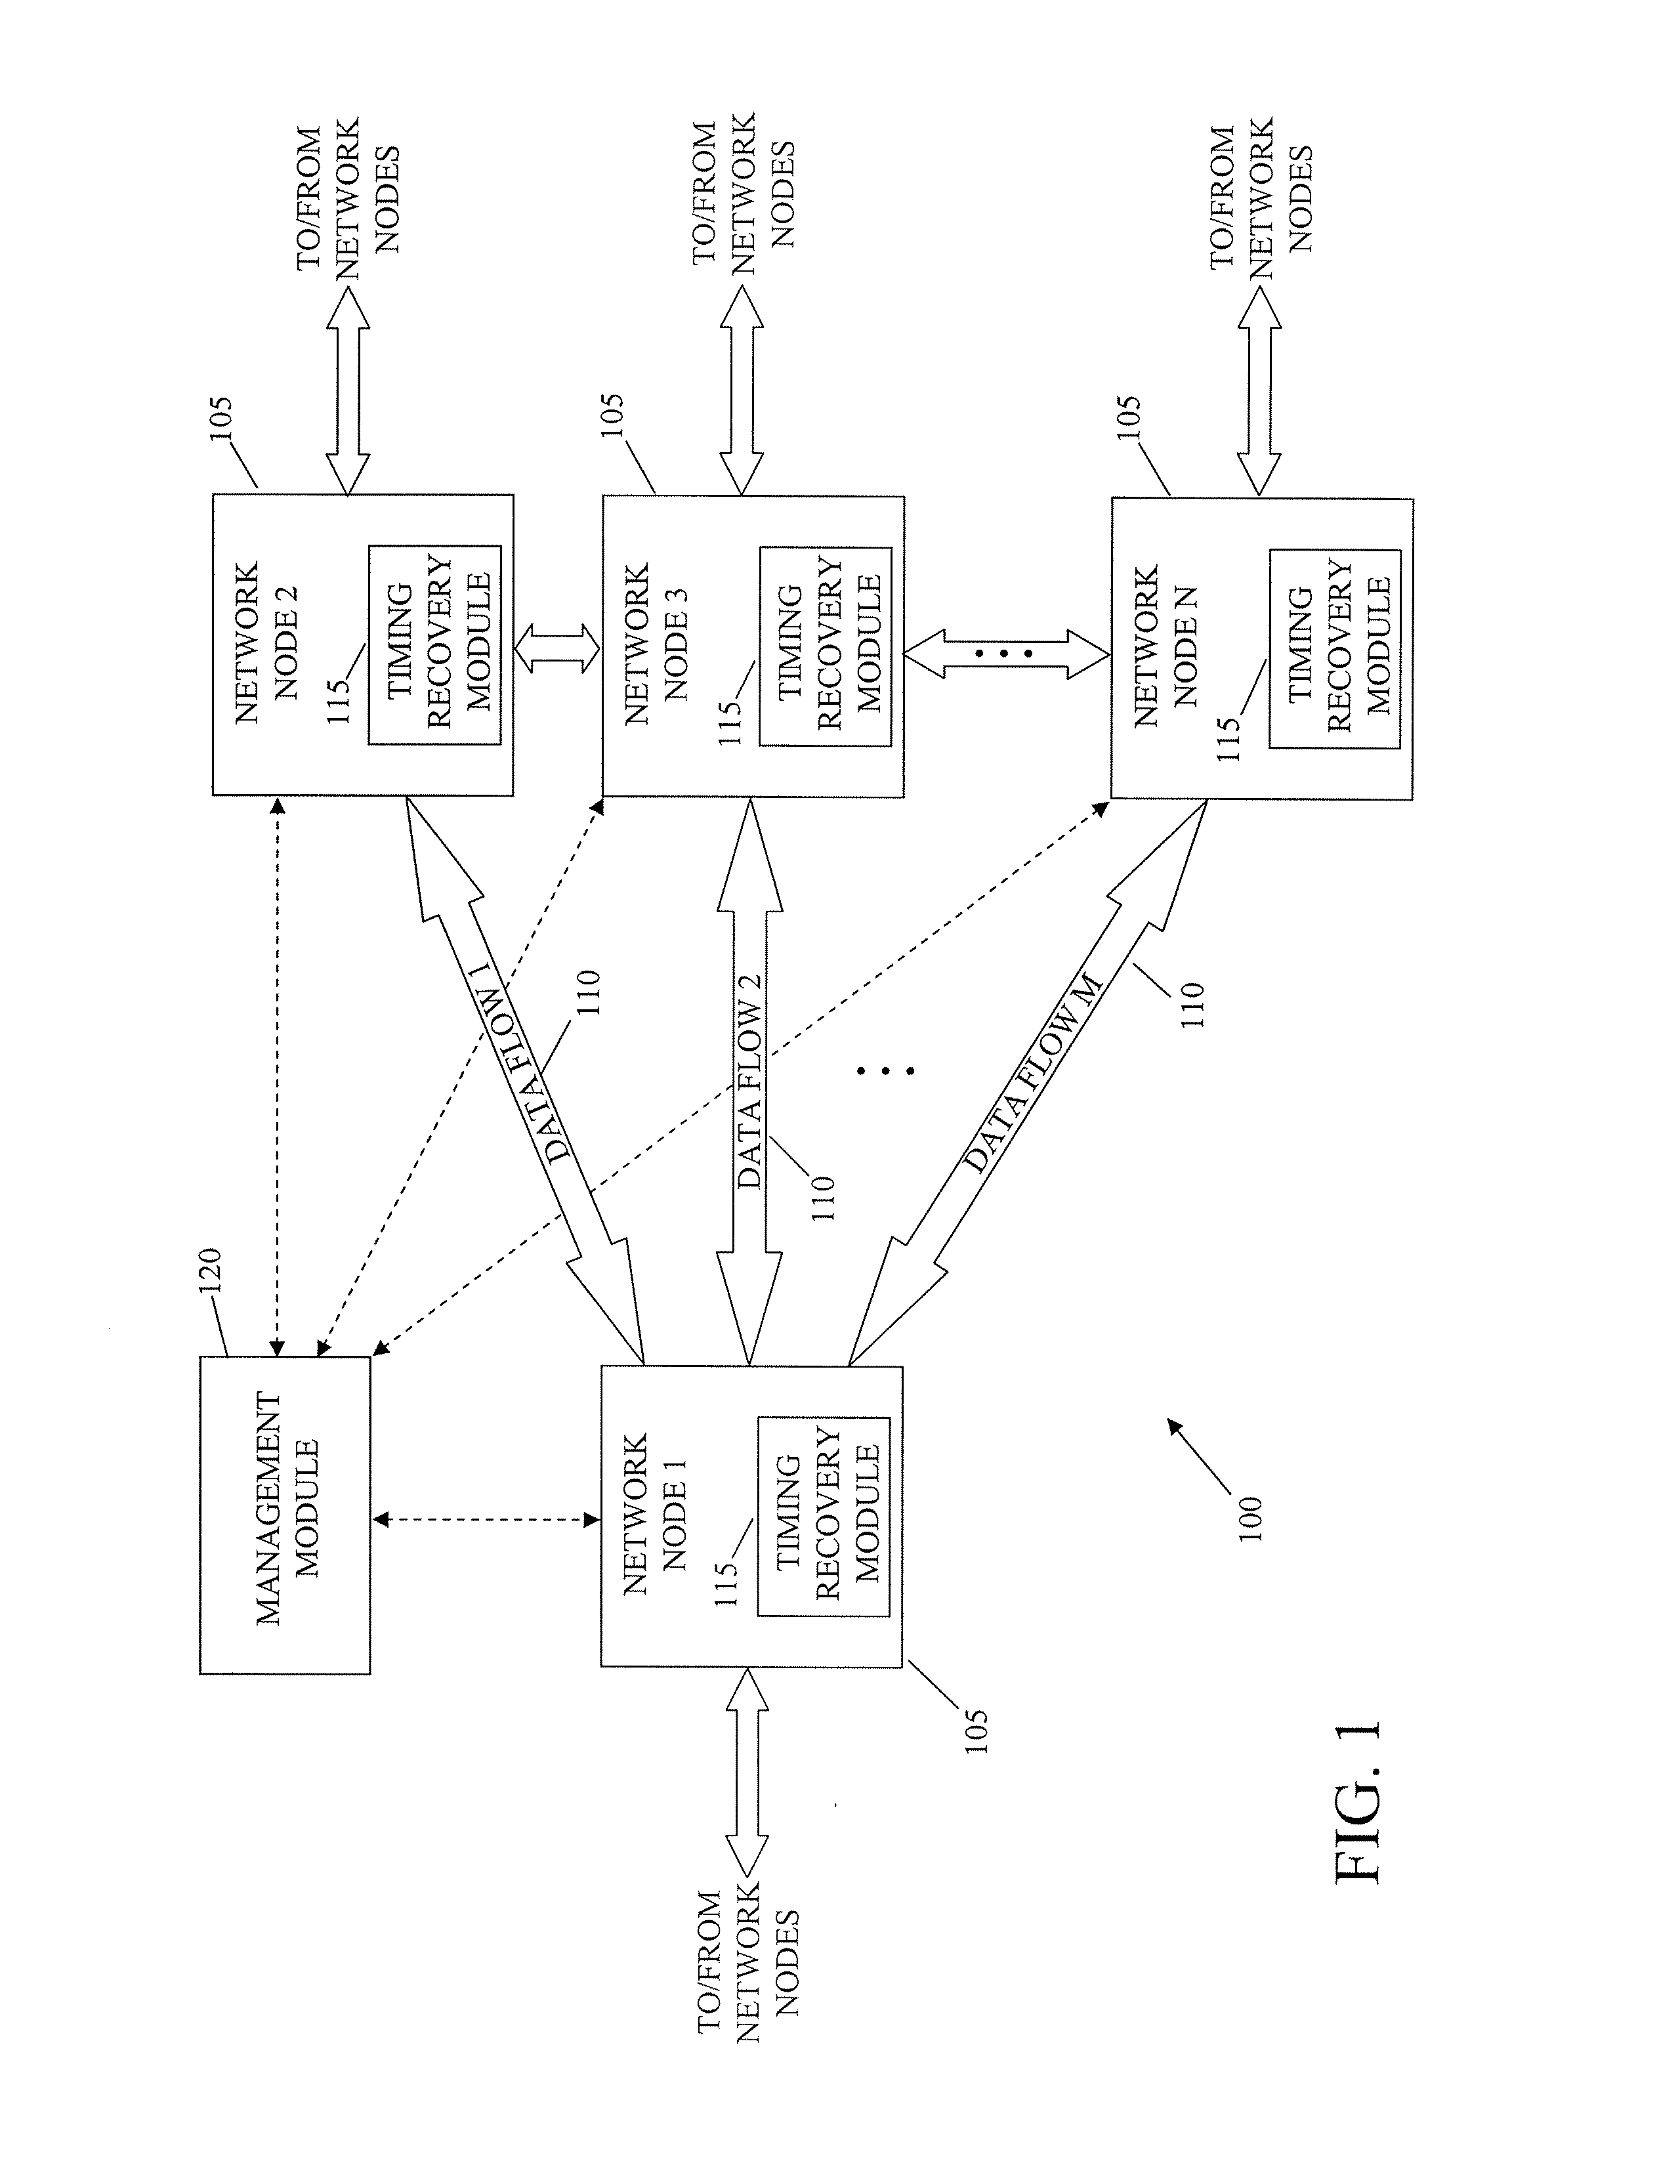 System and method for packet timing of circuit emulation services over networks